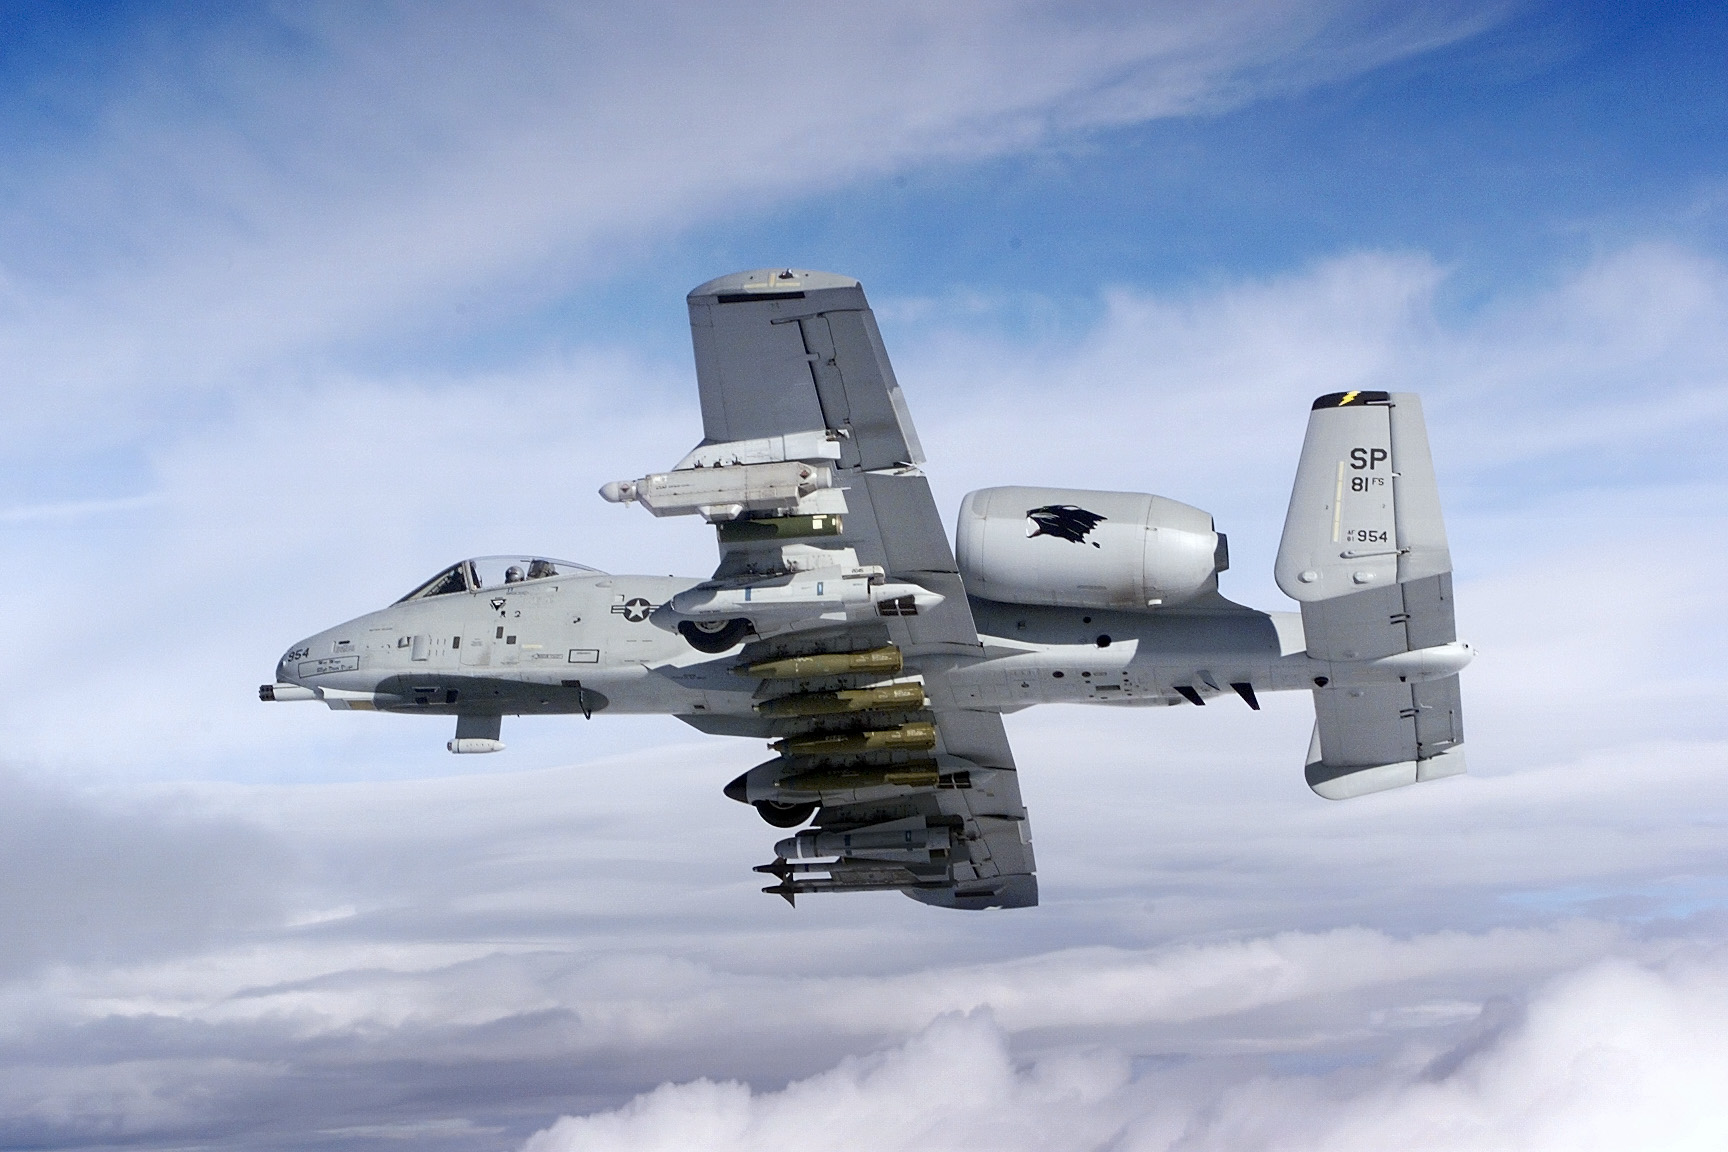 The A-10A Thunderbolt II is the American equivalent of the Su-25